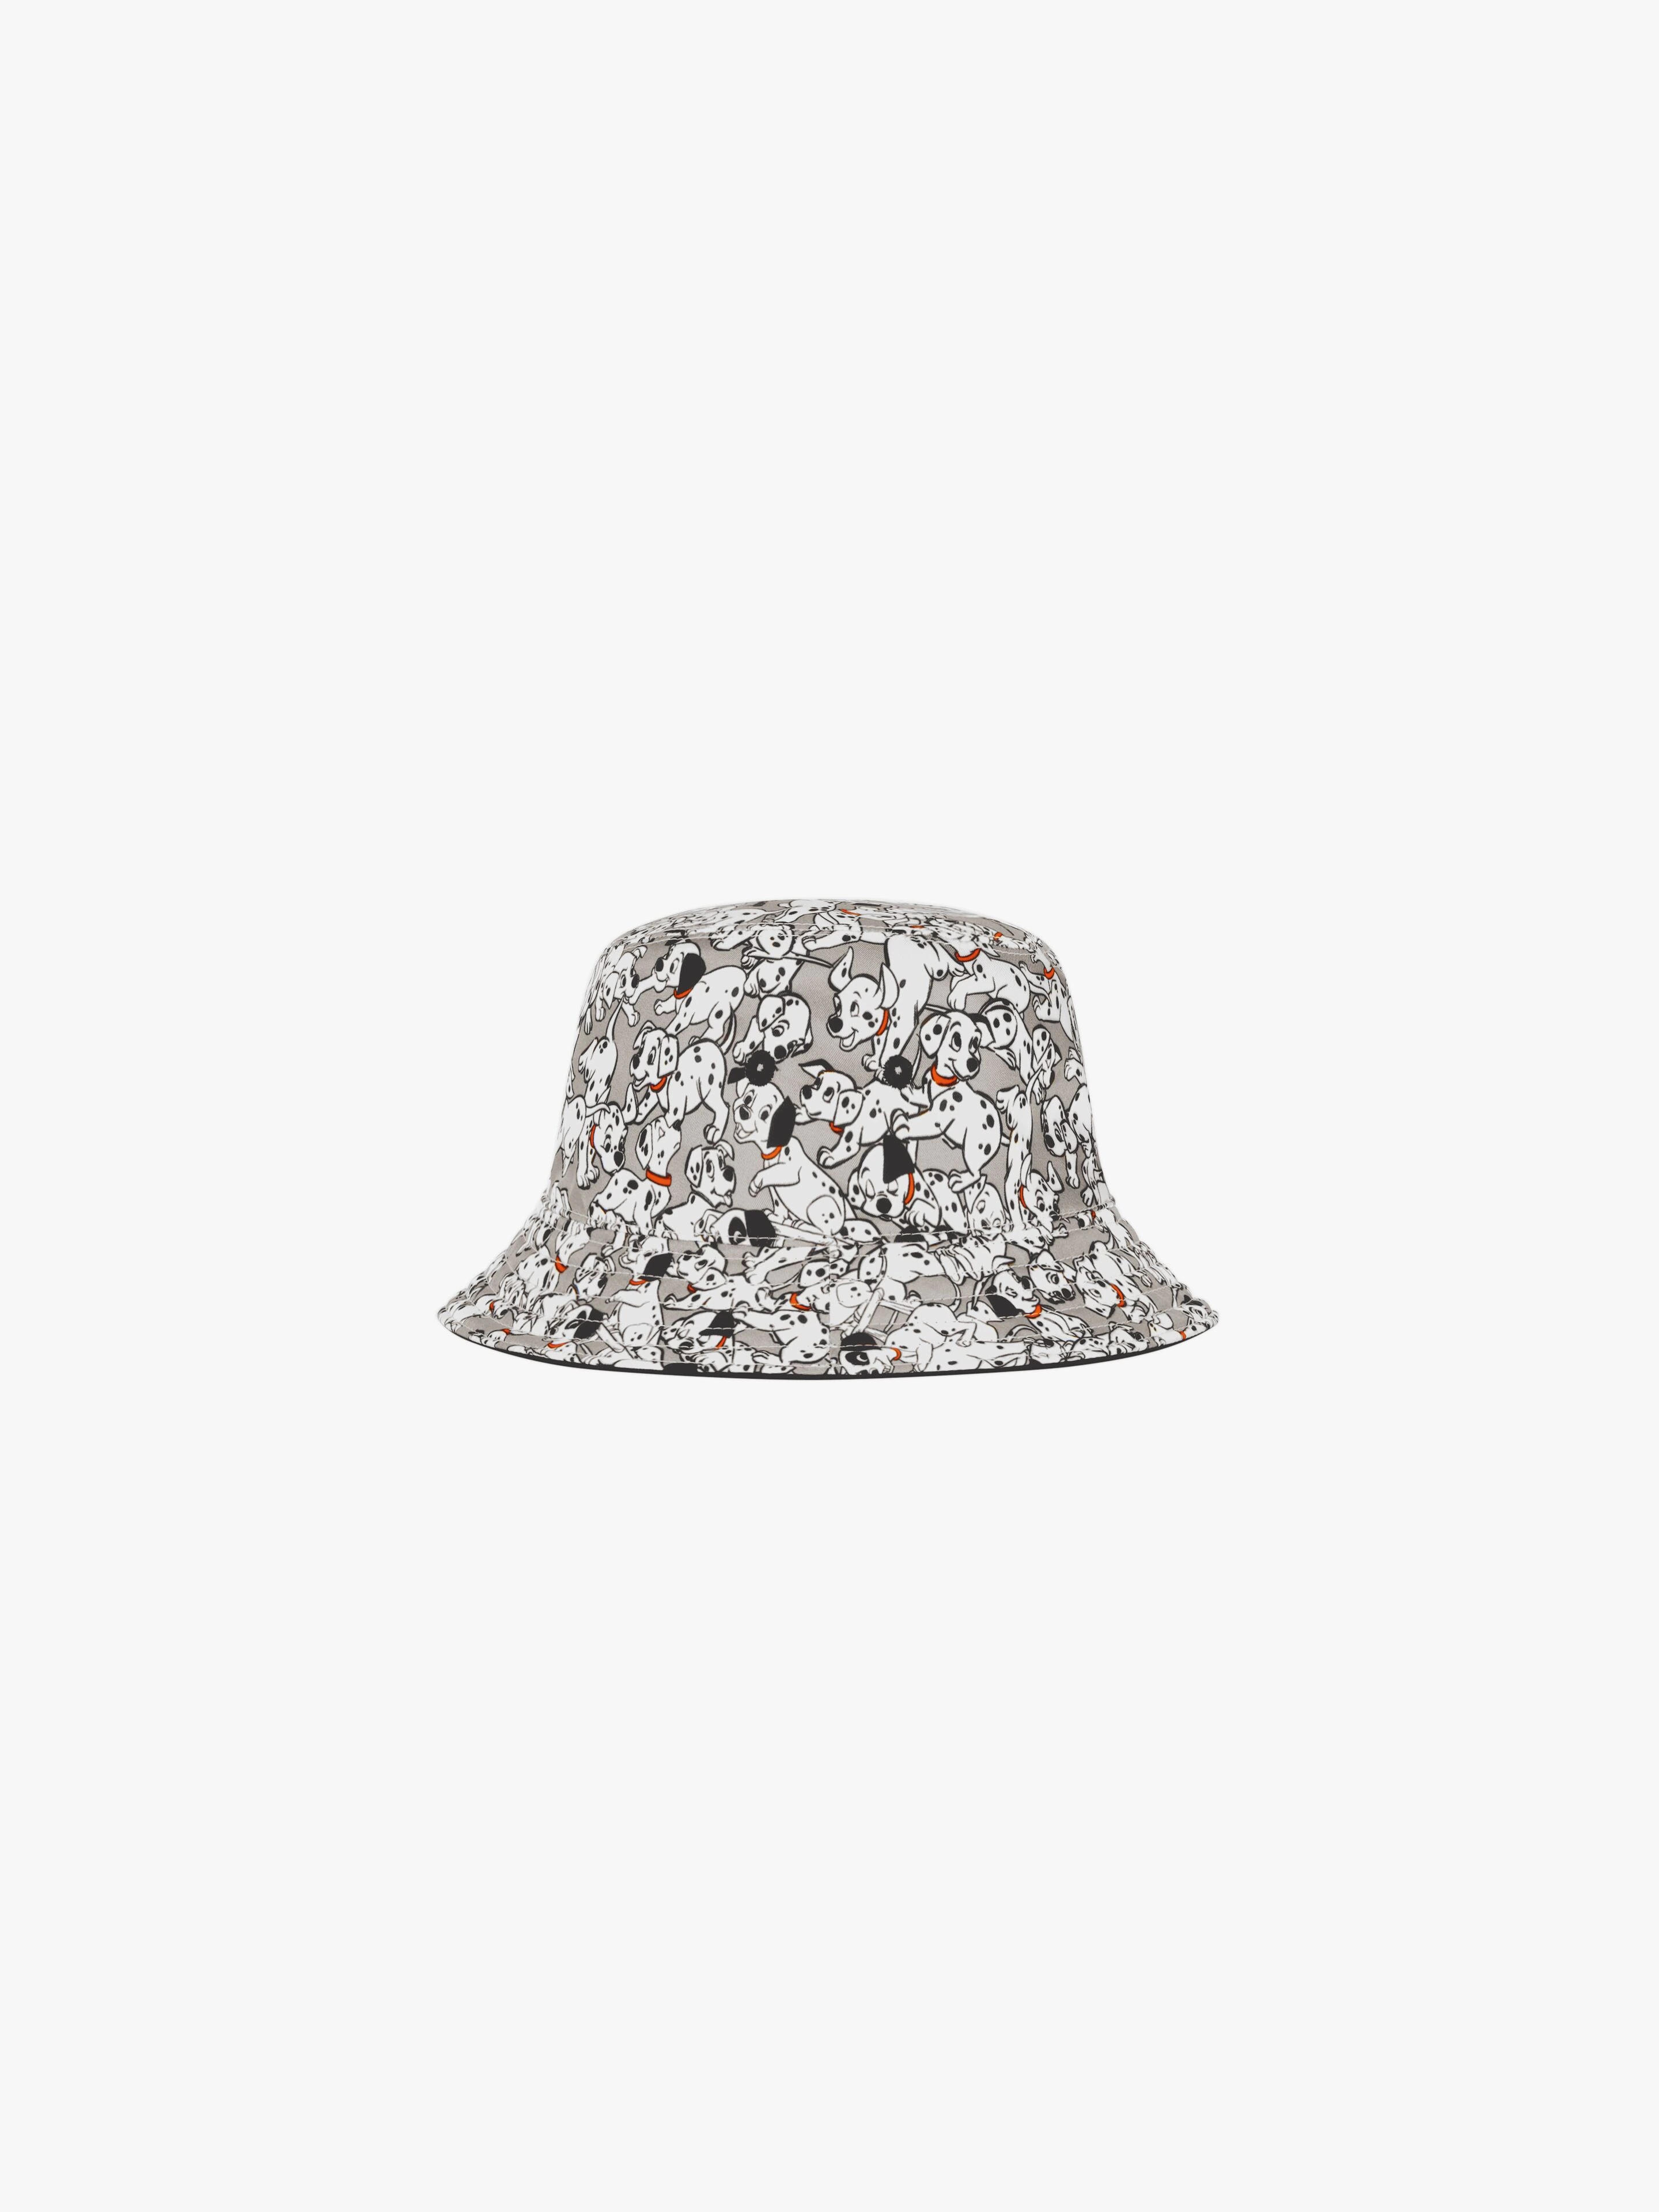 GIVENCHY 101 DALMATIANS REVERSIBLE BUCKET HAT IN PRINTED NYLON - 4